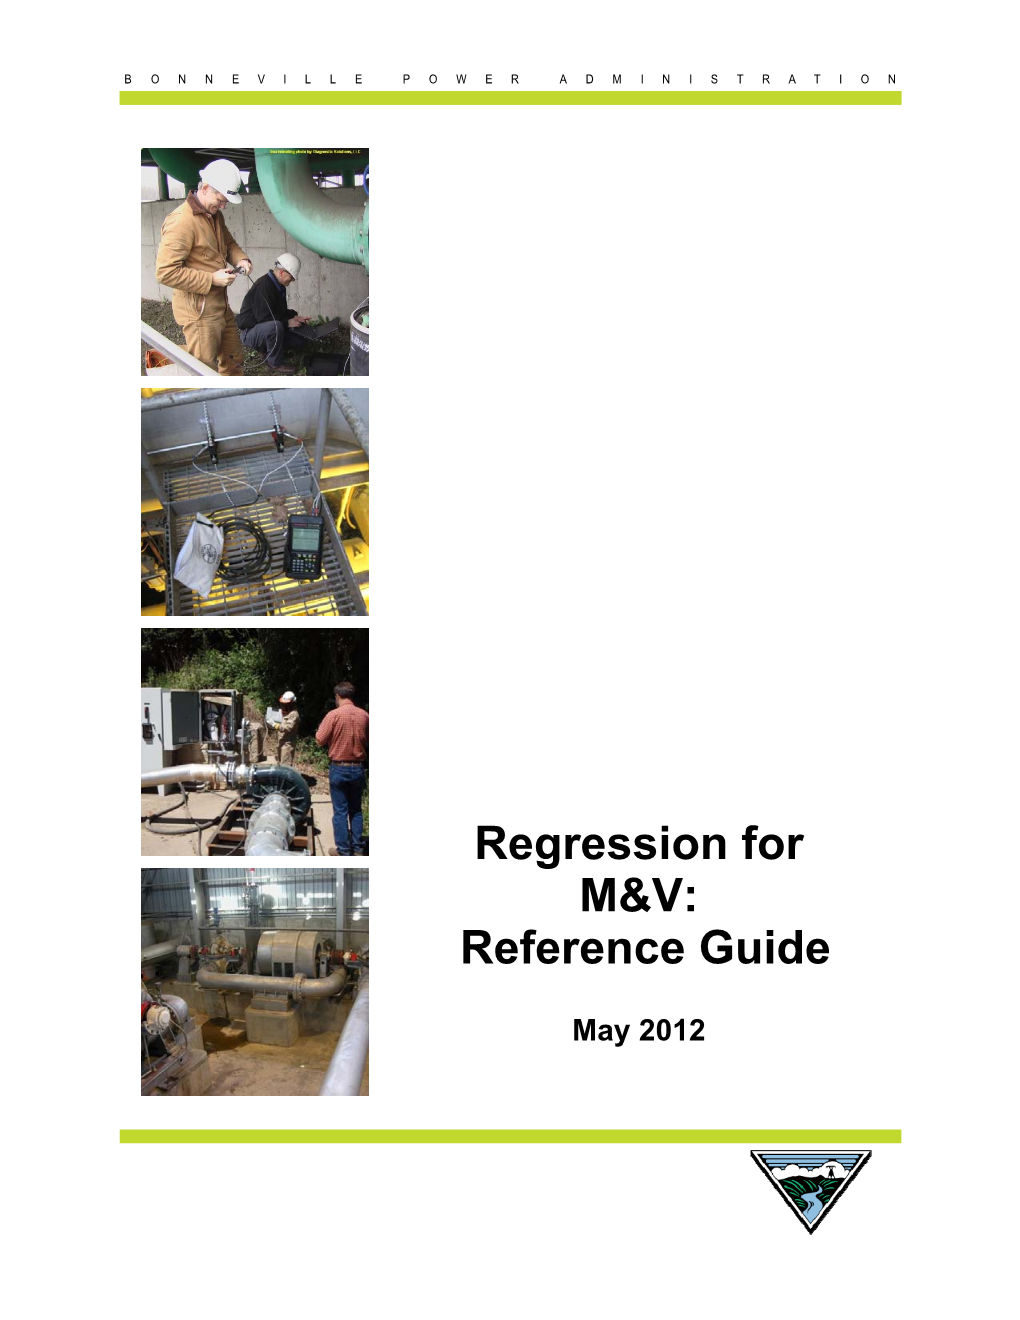 BPA Regression for M&V: Reference Guide